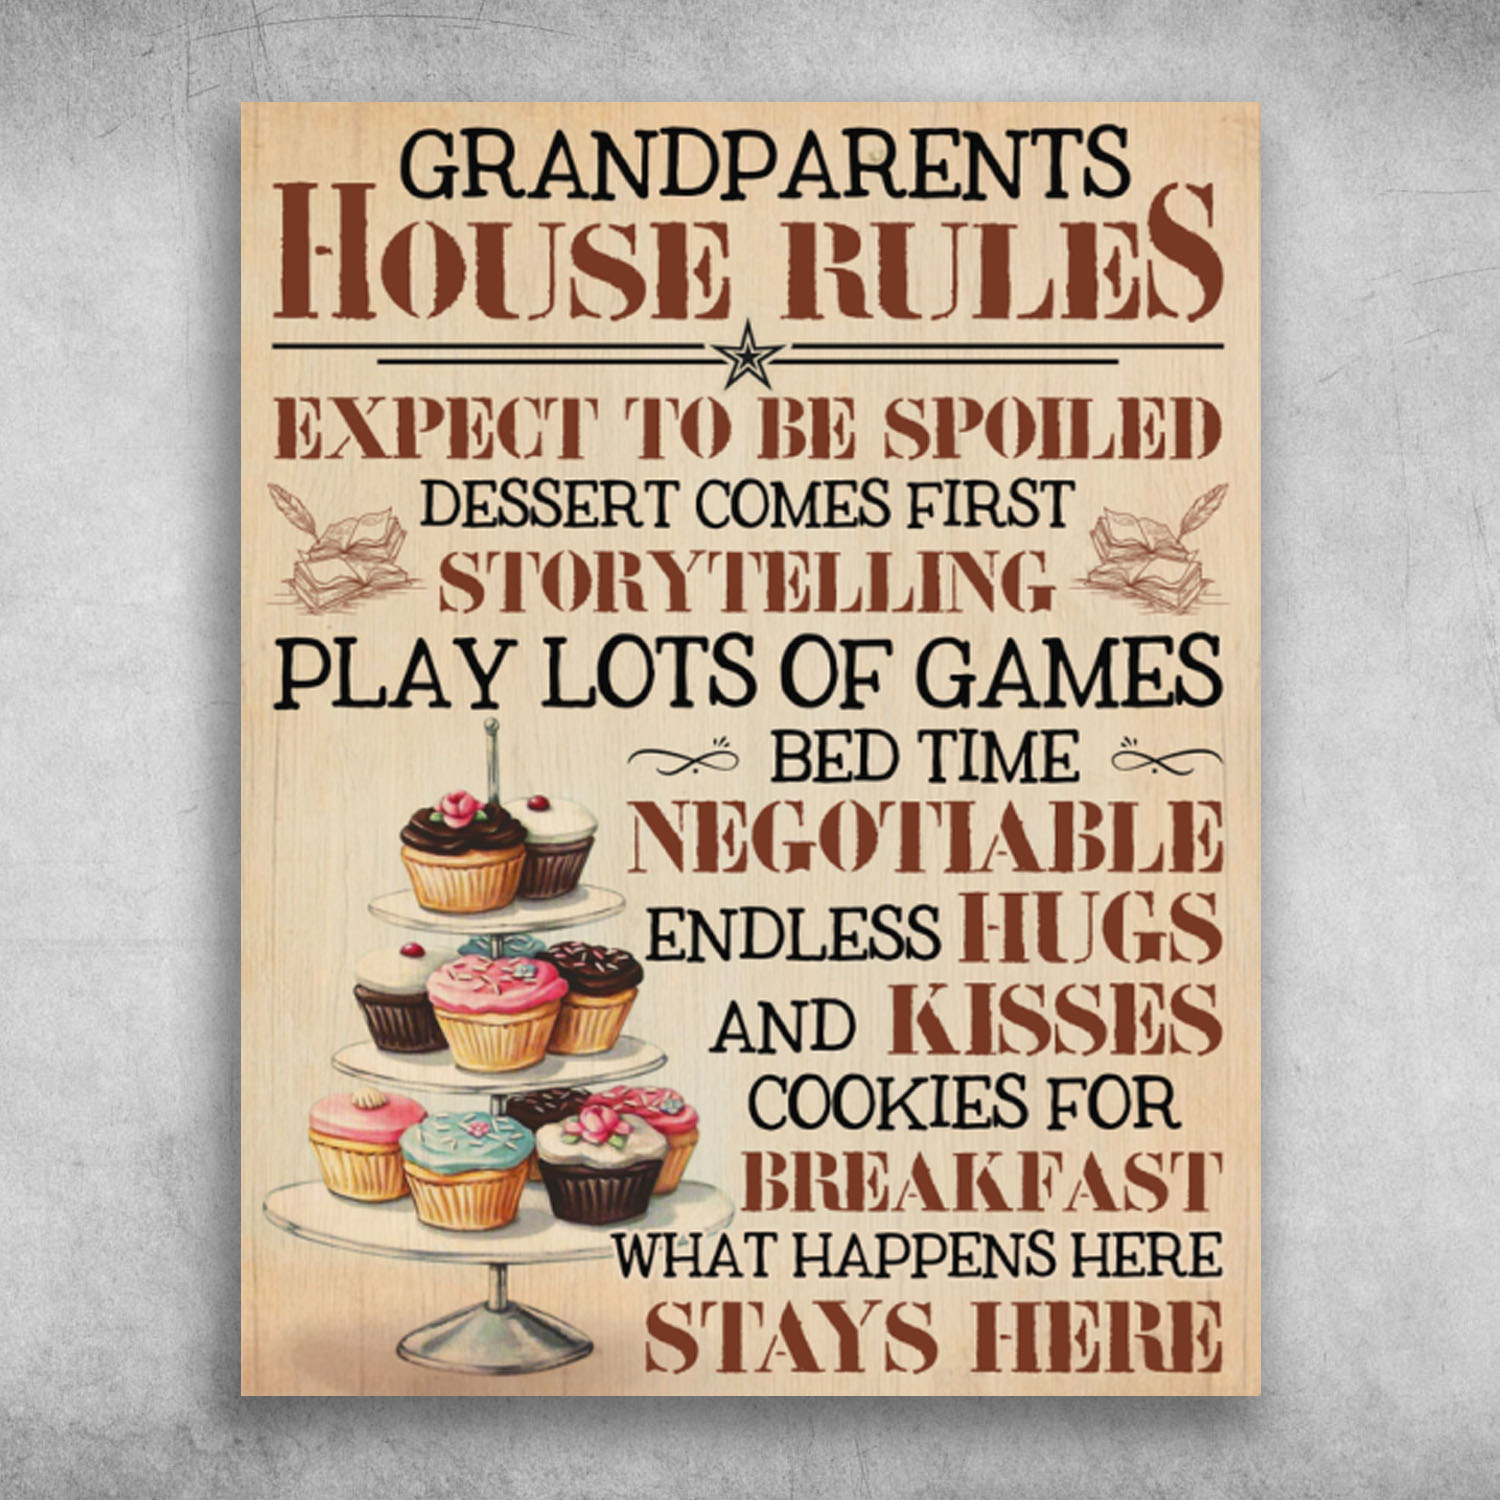 Grandparents House Rules Cupcake What Happens Here Stays Here